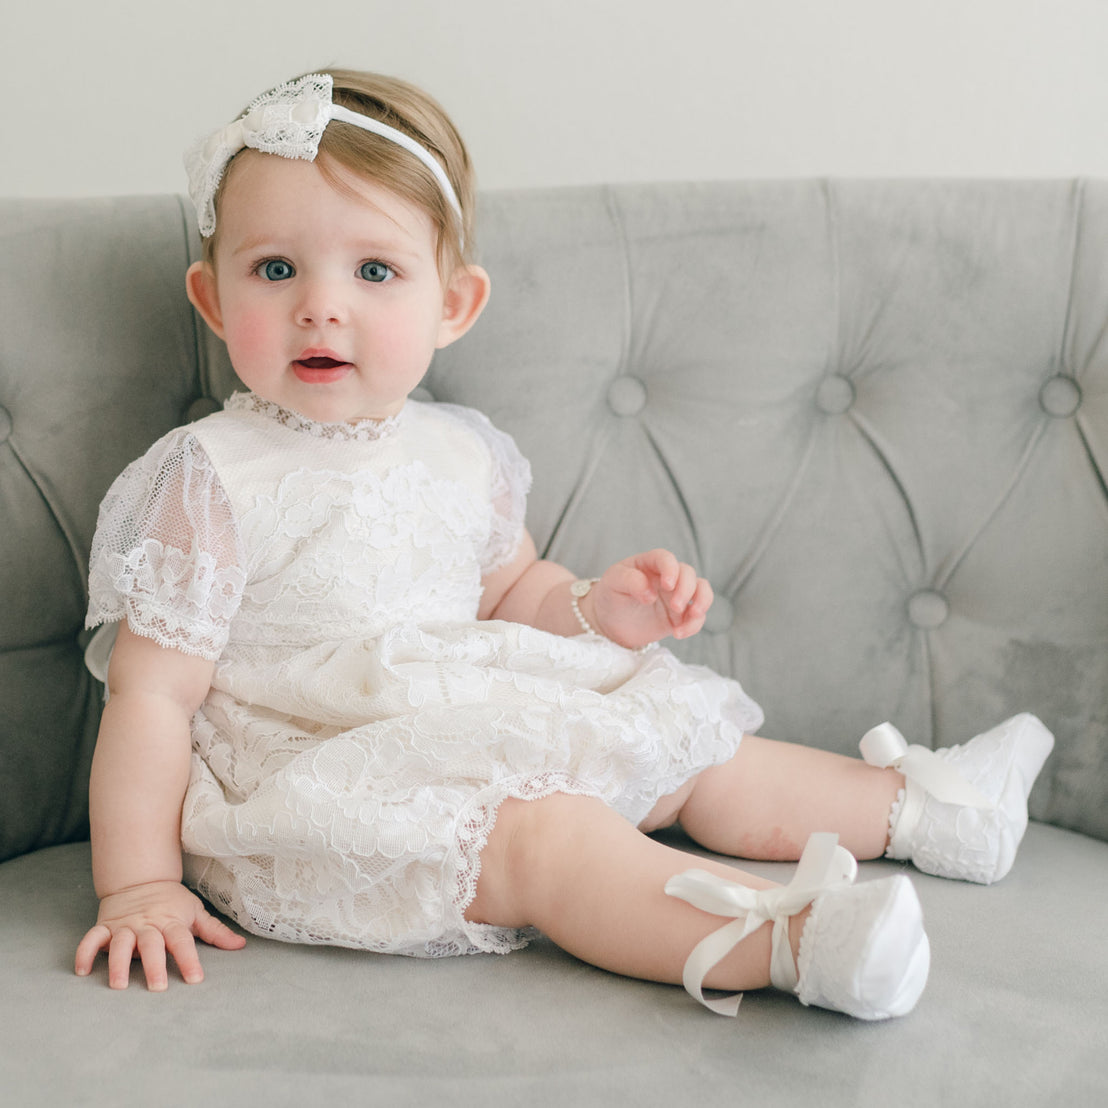 A baby girl with blue eyes, wearing an Aria Bubble Romper and headband, sits on a grey sofa. She is also wearing the Light Ivory Lace Booties.